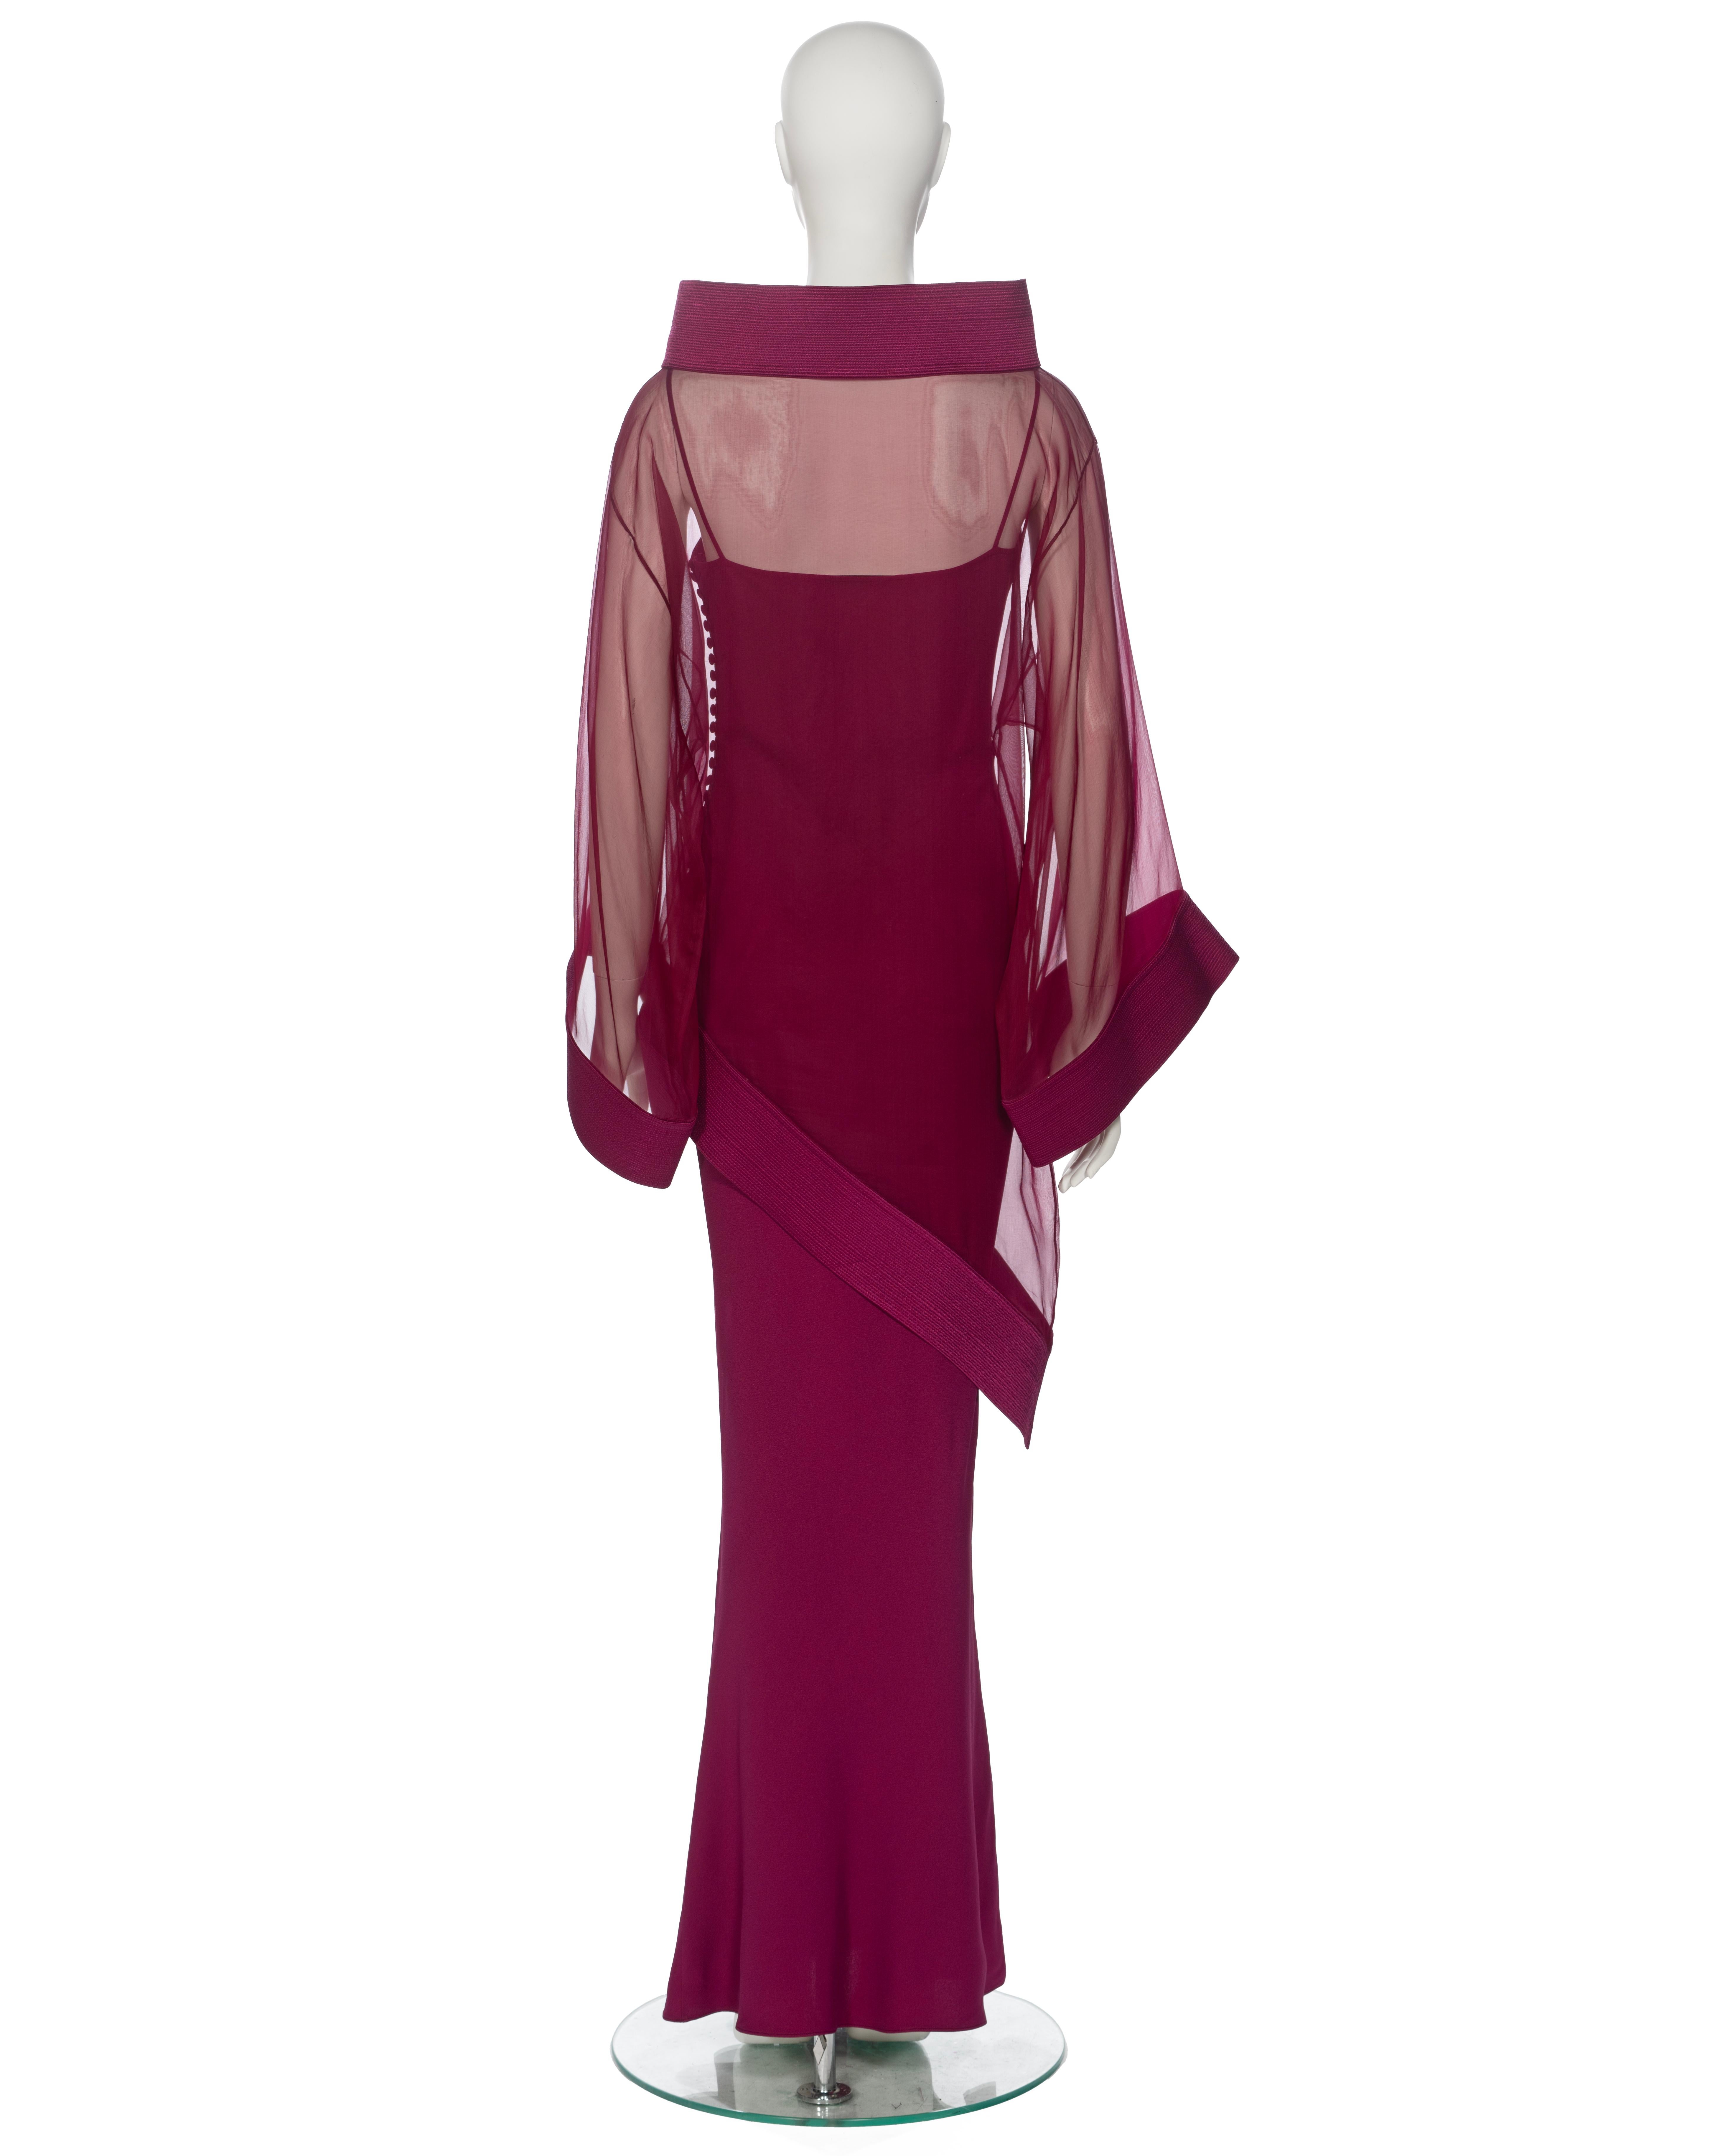 Christian Dior by John Galliano Claret Evening Dress and Tunic Ensemble, fw 1999 For Sale 3